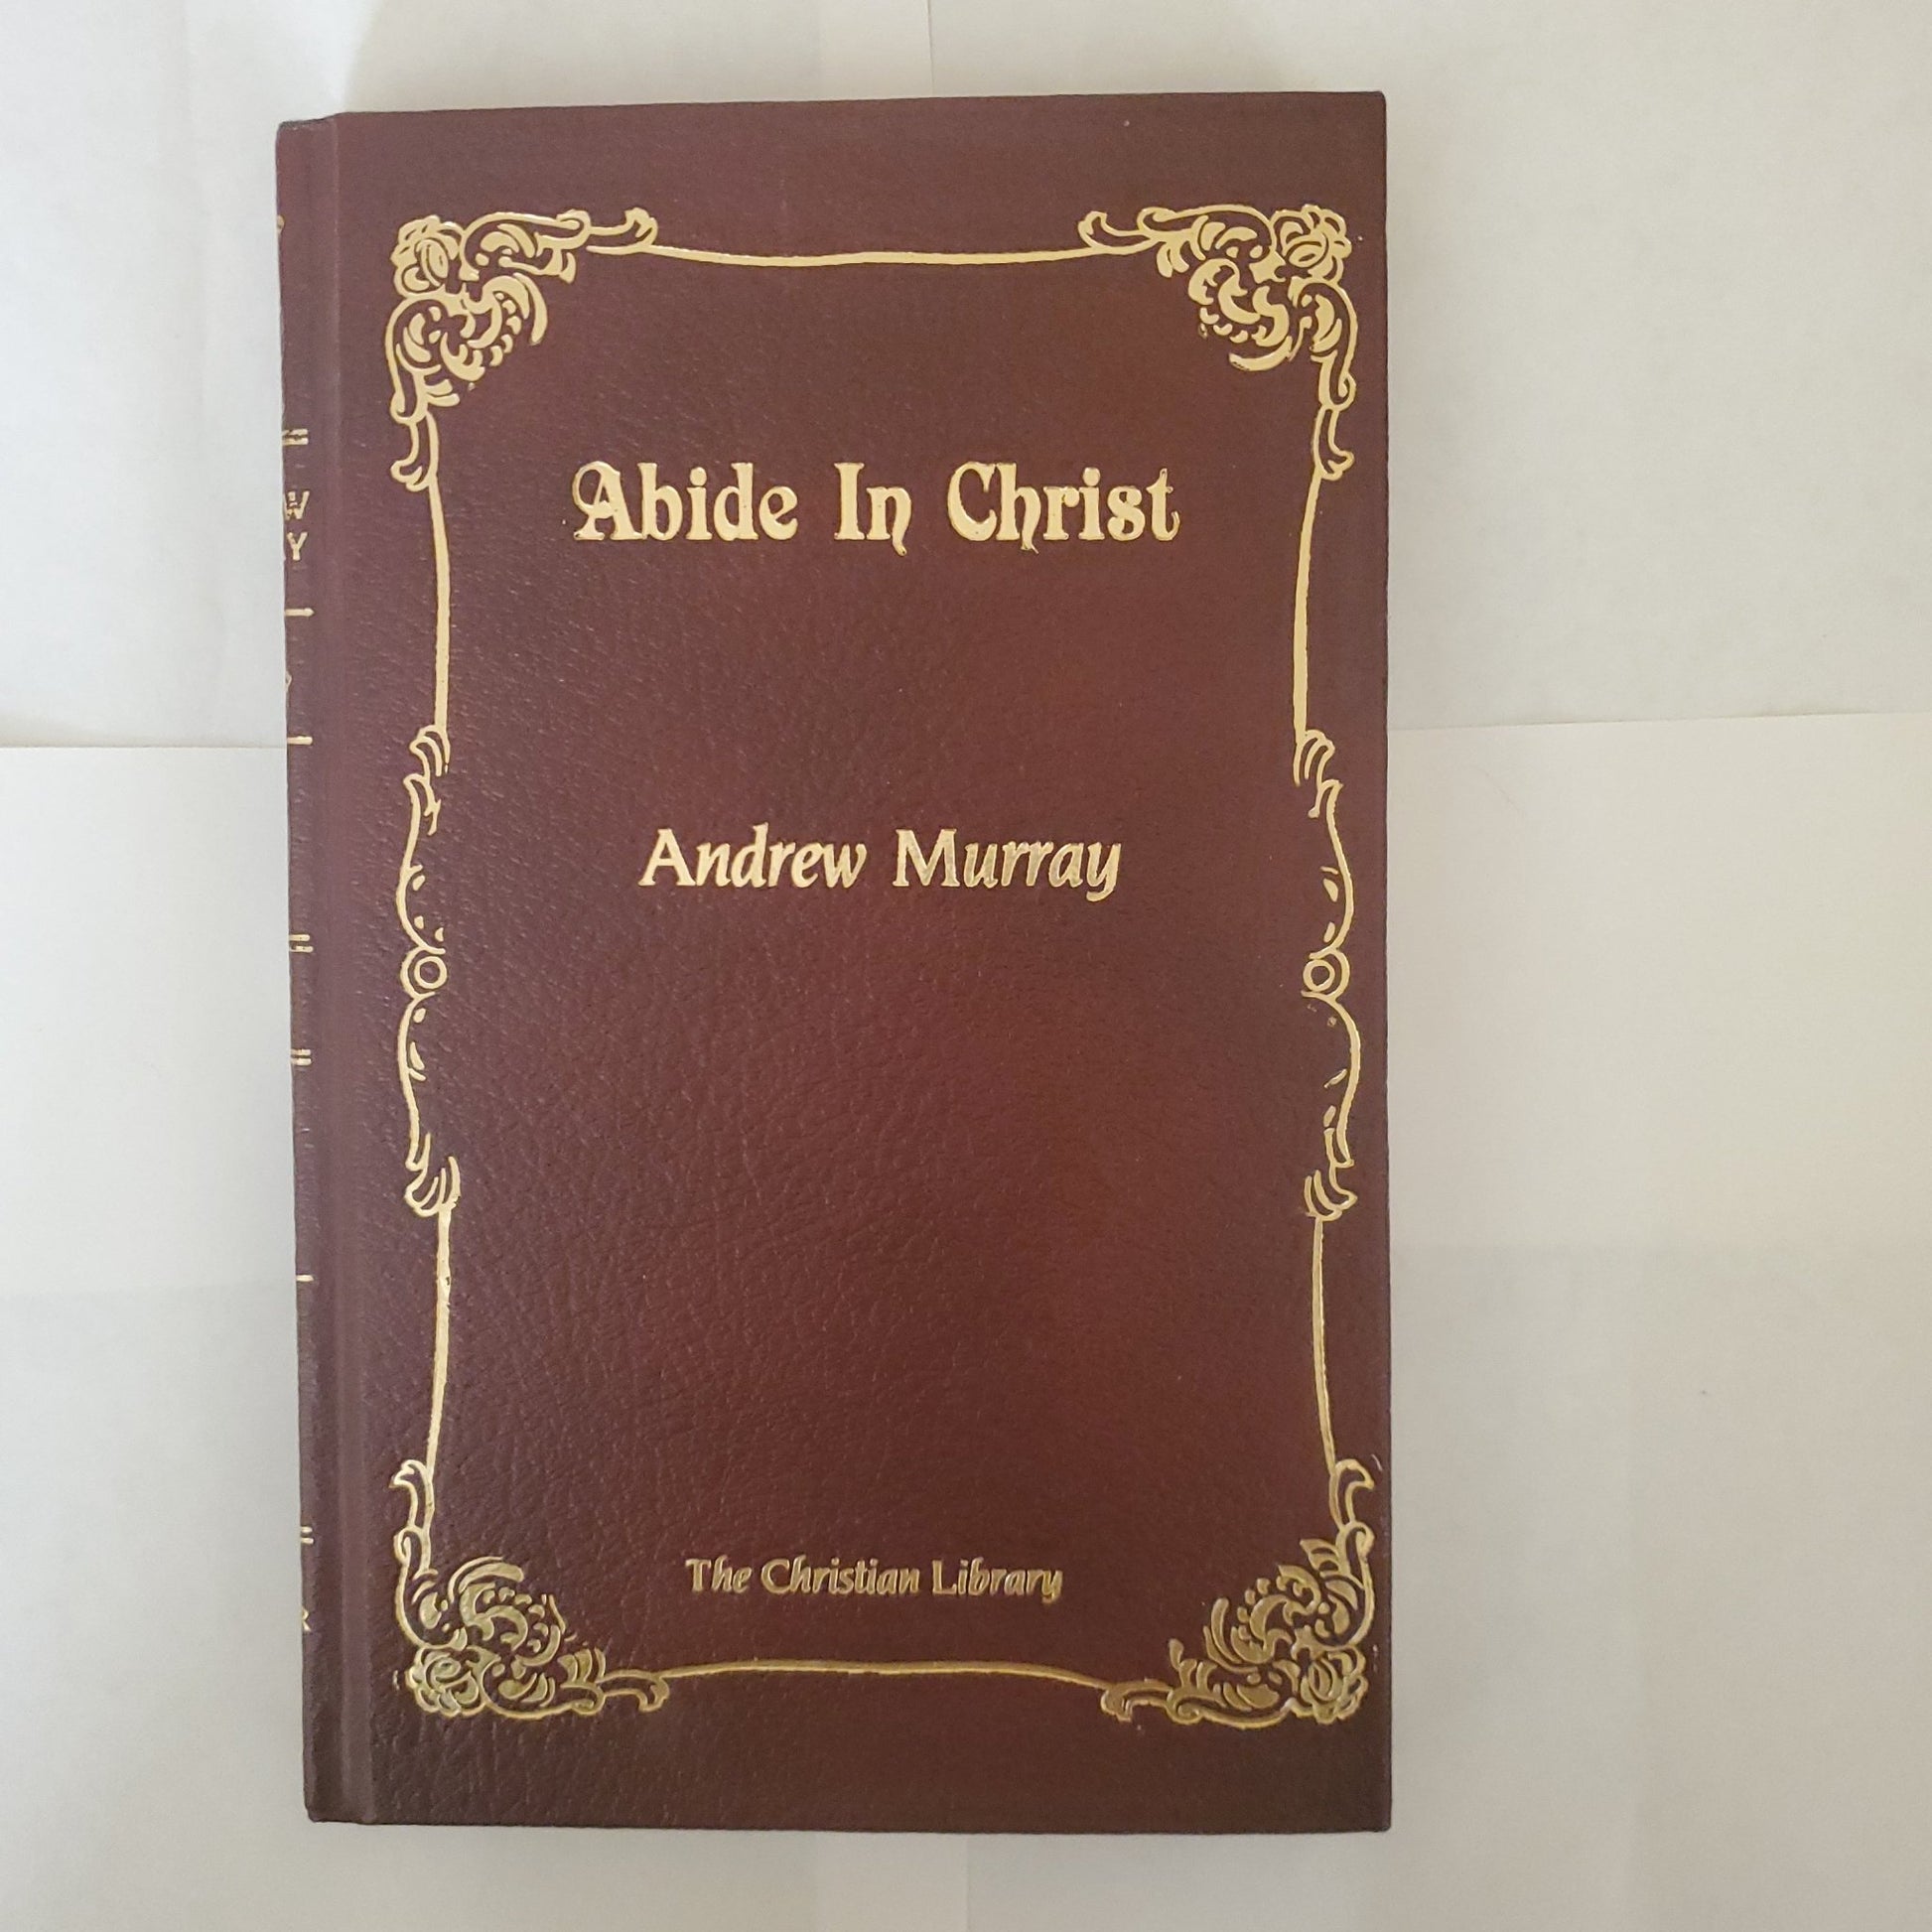 Abide in Christ - [ash-ling] Booksellers